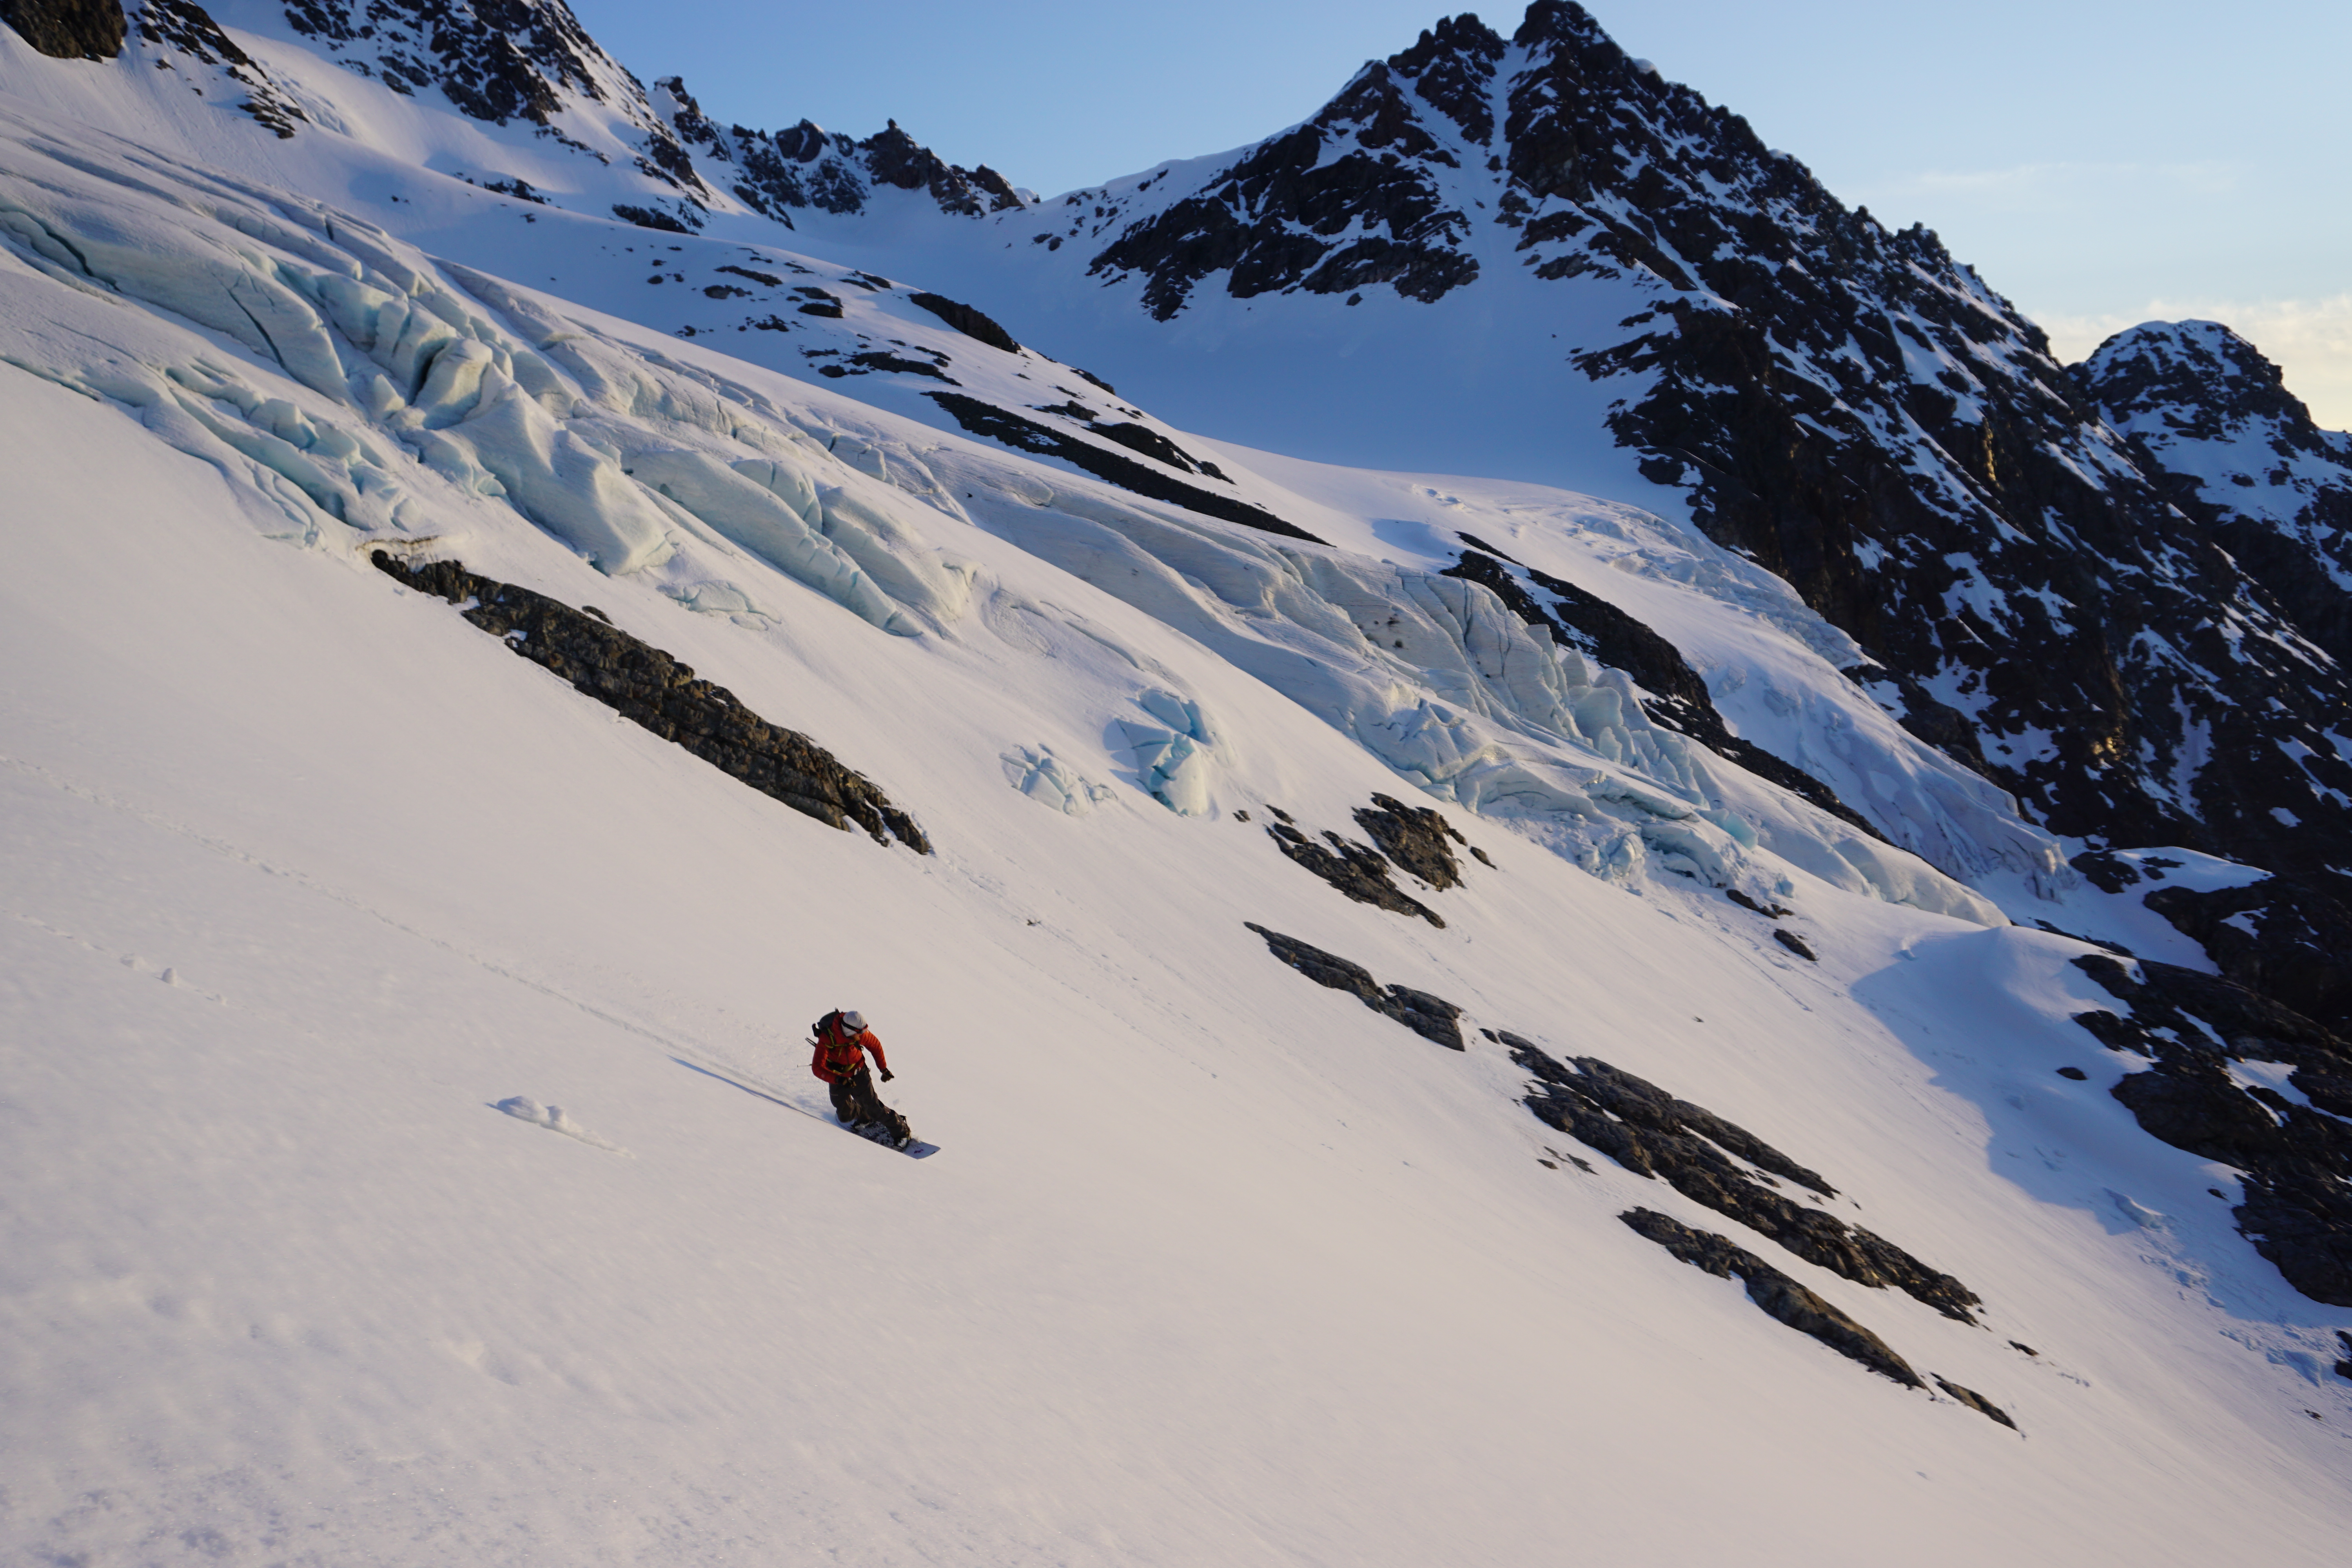 Snowboarding during the Midnight sun in the Lyngen Alps of Norway